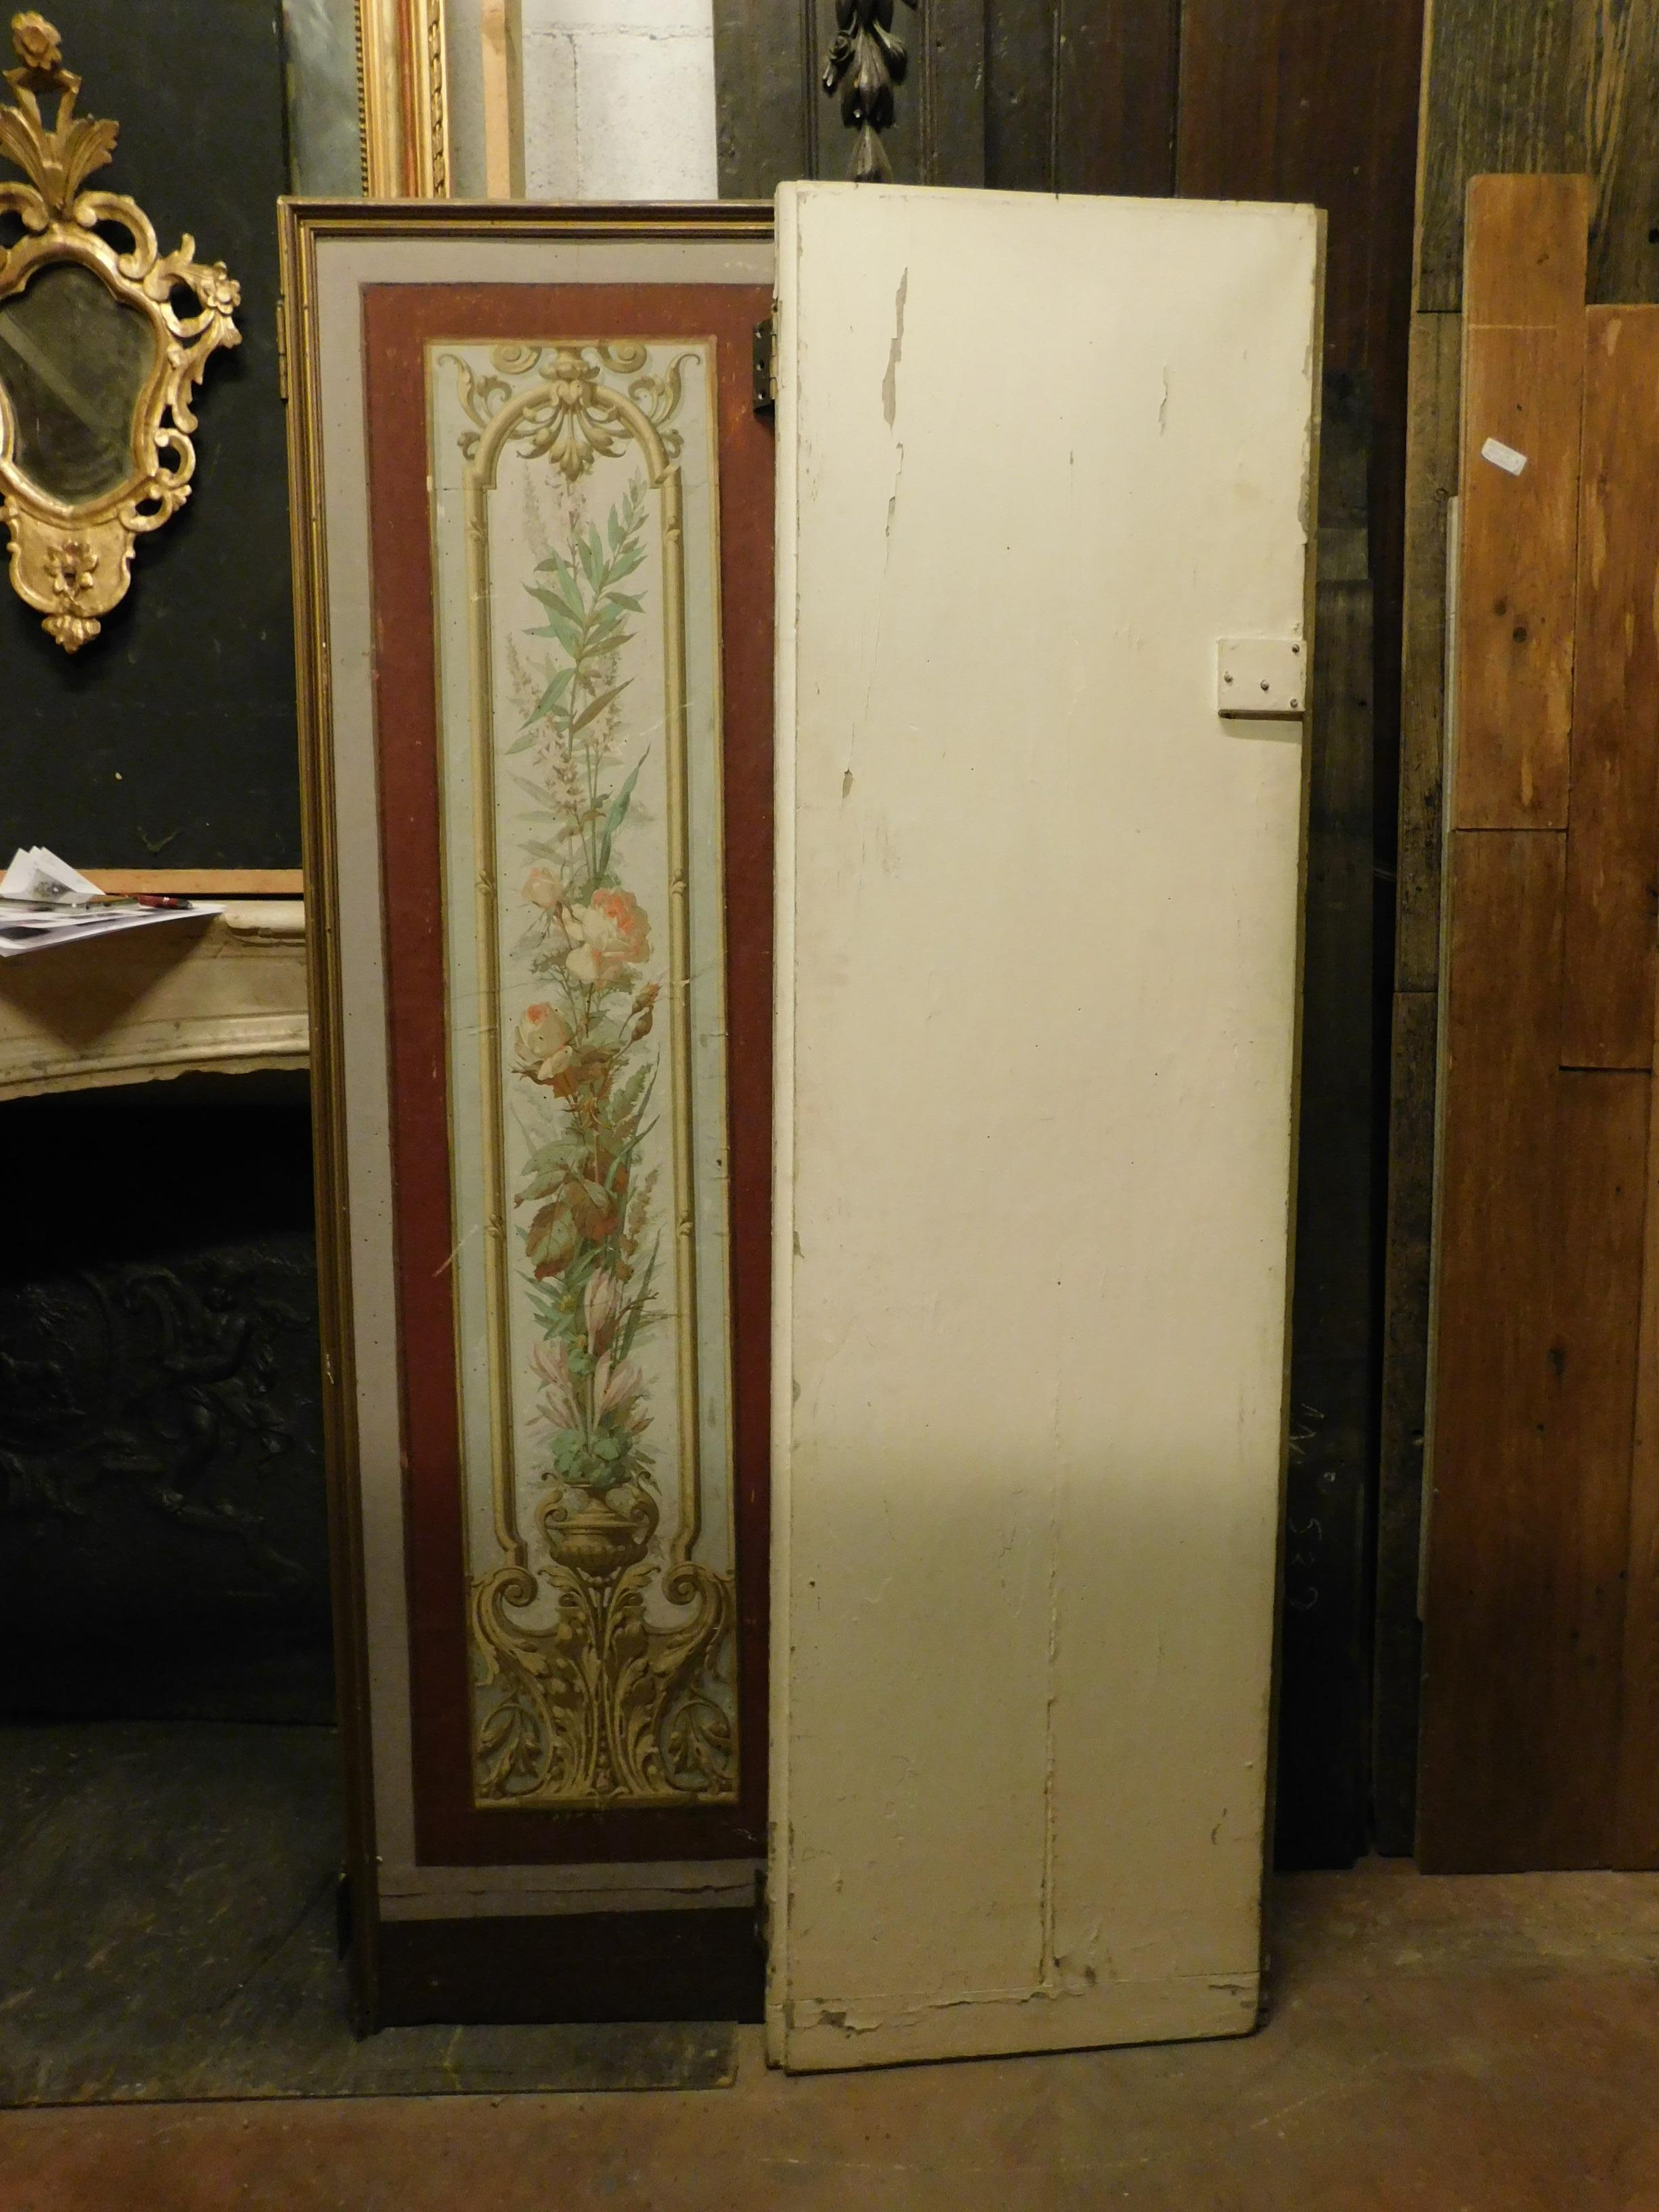 Vintage Pair of Lacquered and Painted Doors, Art Nouveau, Liberty, Early 1900s For Sale 1